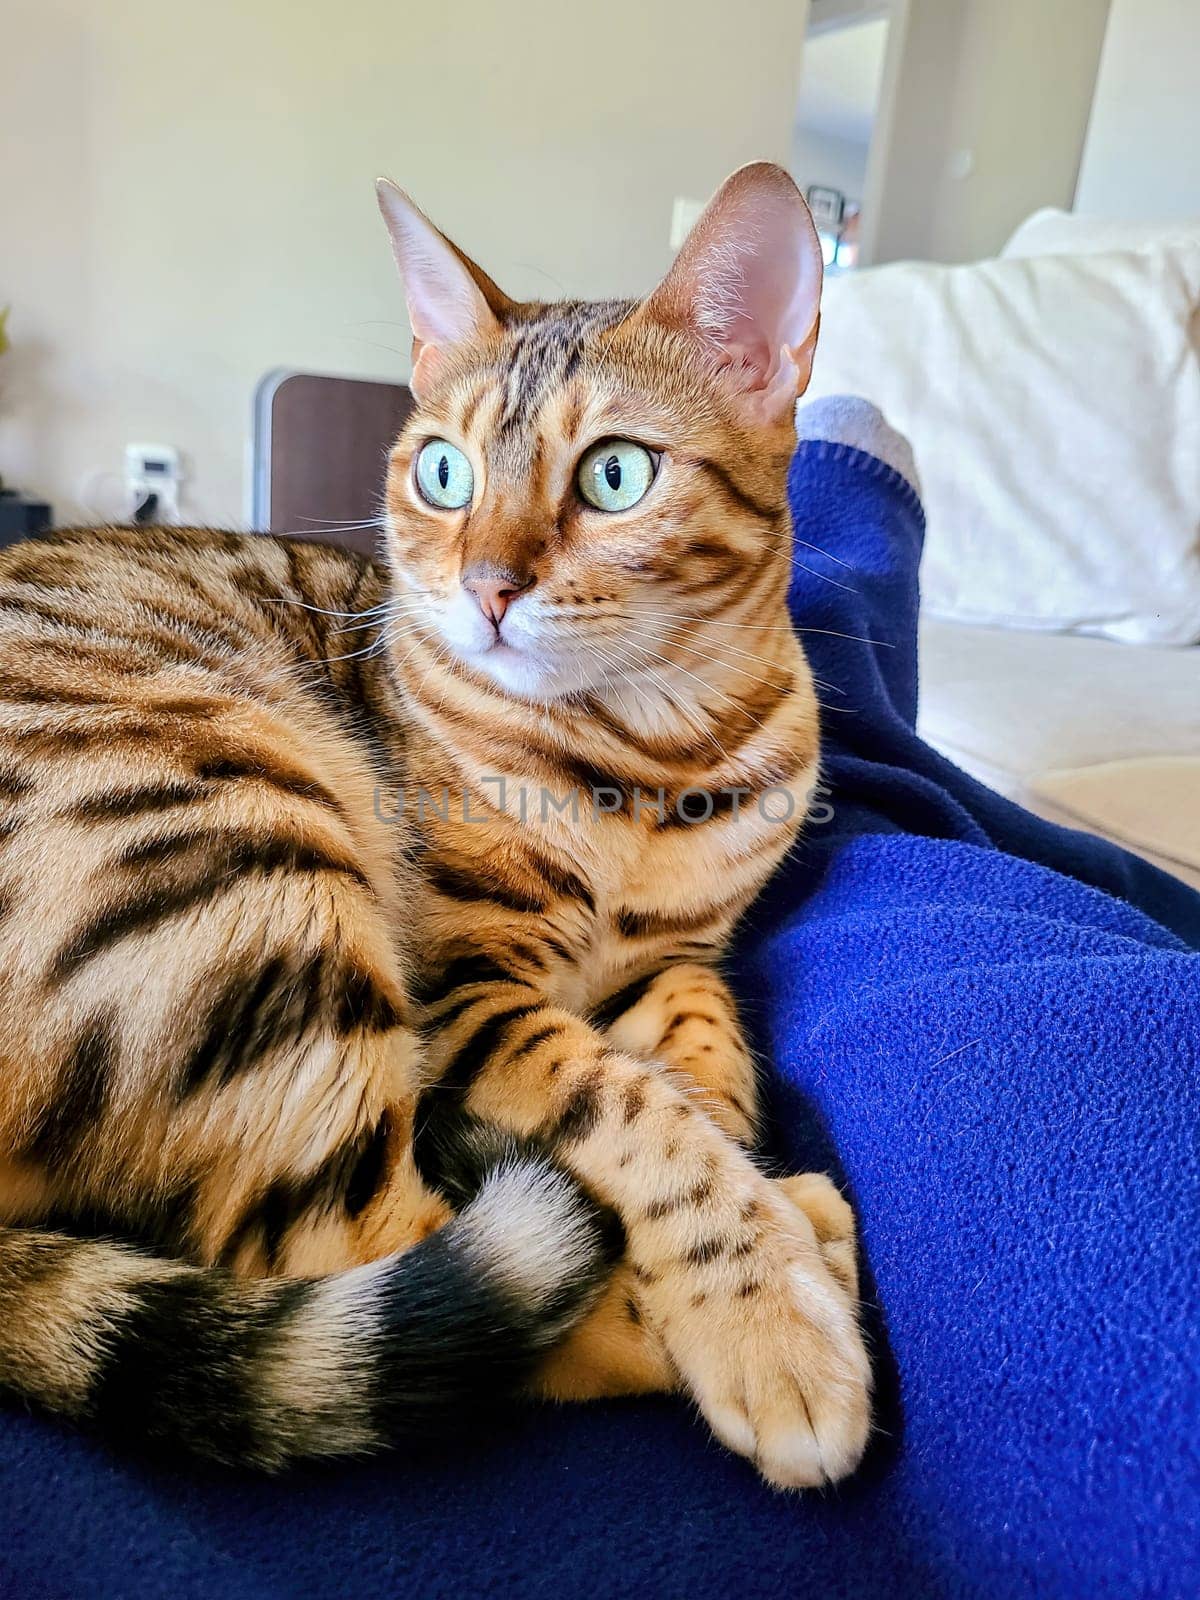 Bengal Cat Lounging on Blue Blanket in Comfortable Living Room, Fort Wayne, Indiana, 2021